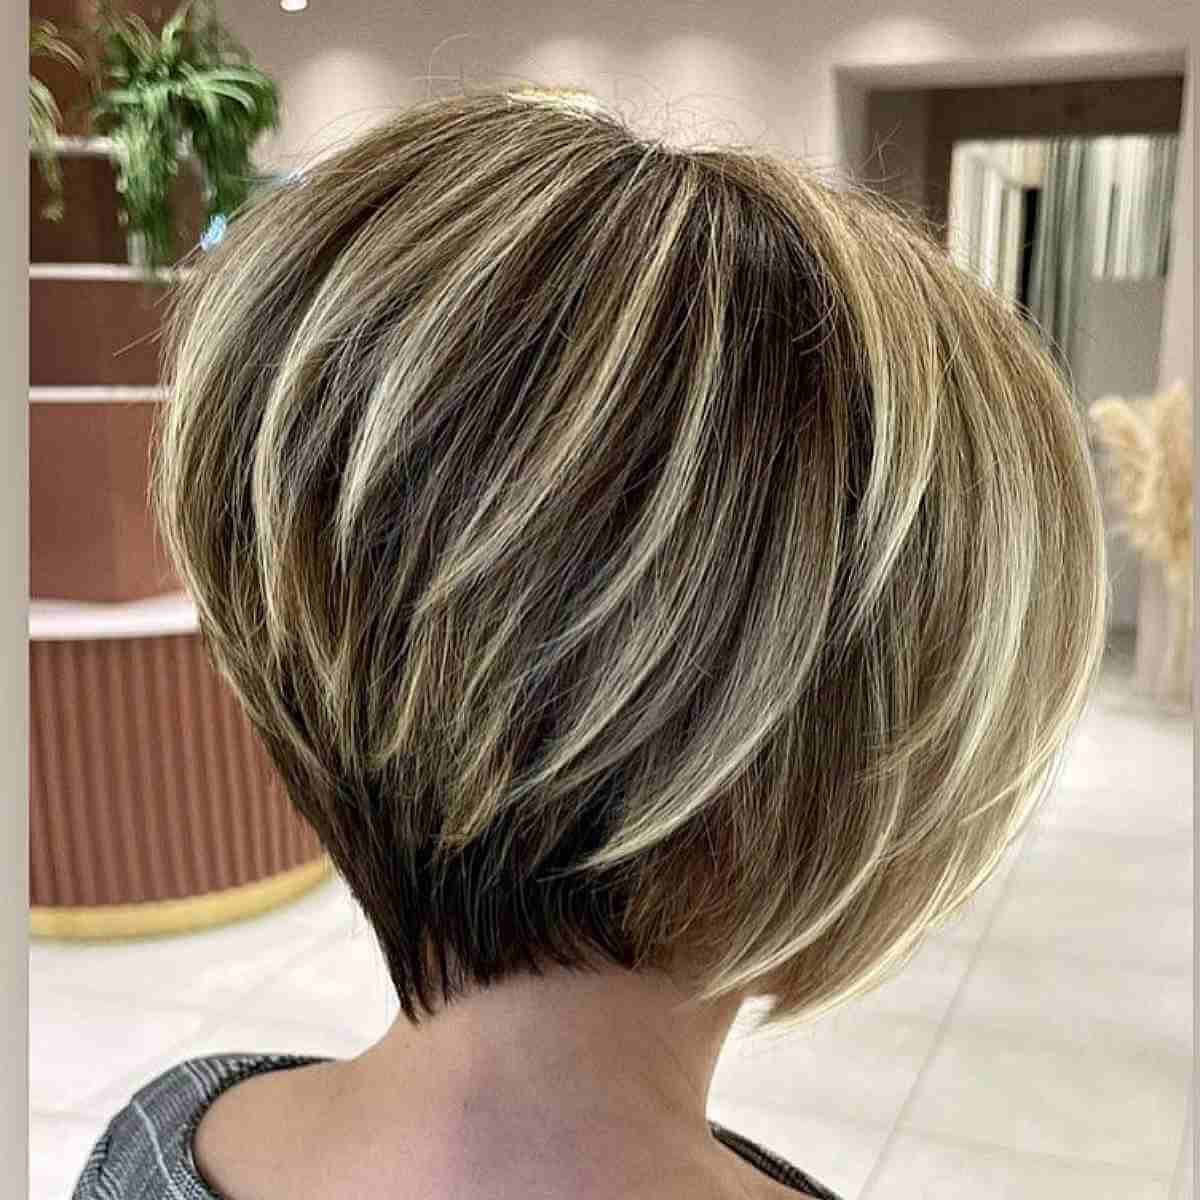 Short Bronde Pixie Bob with Layers